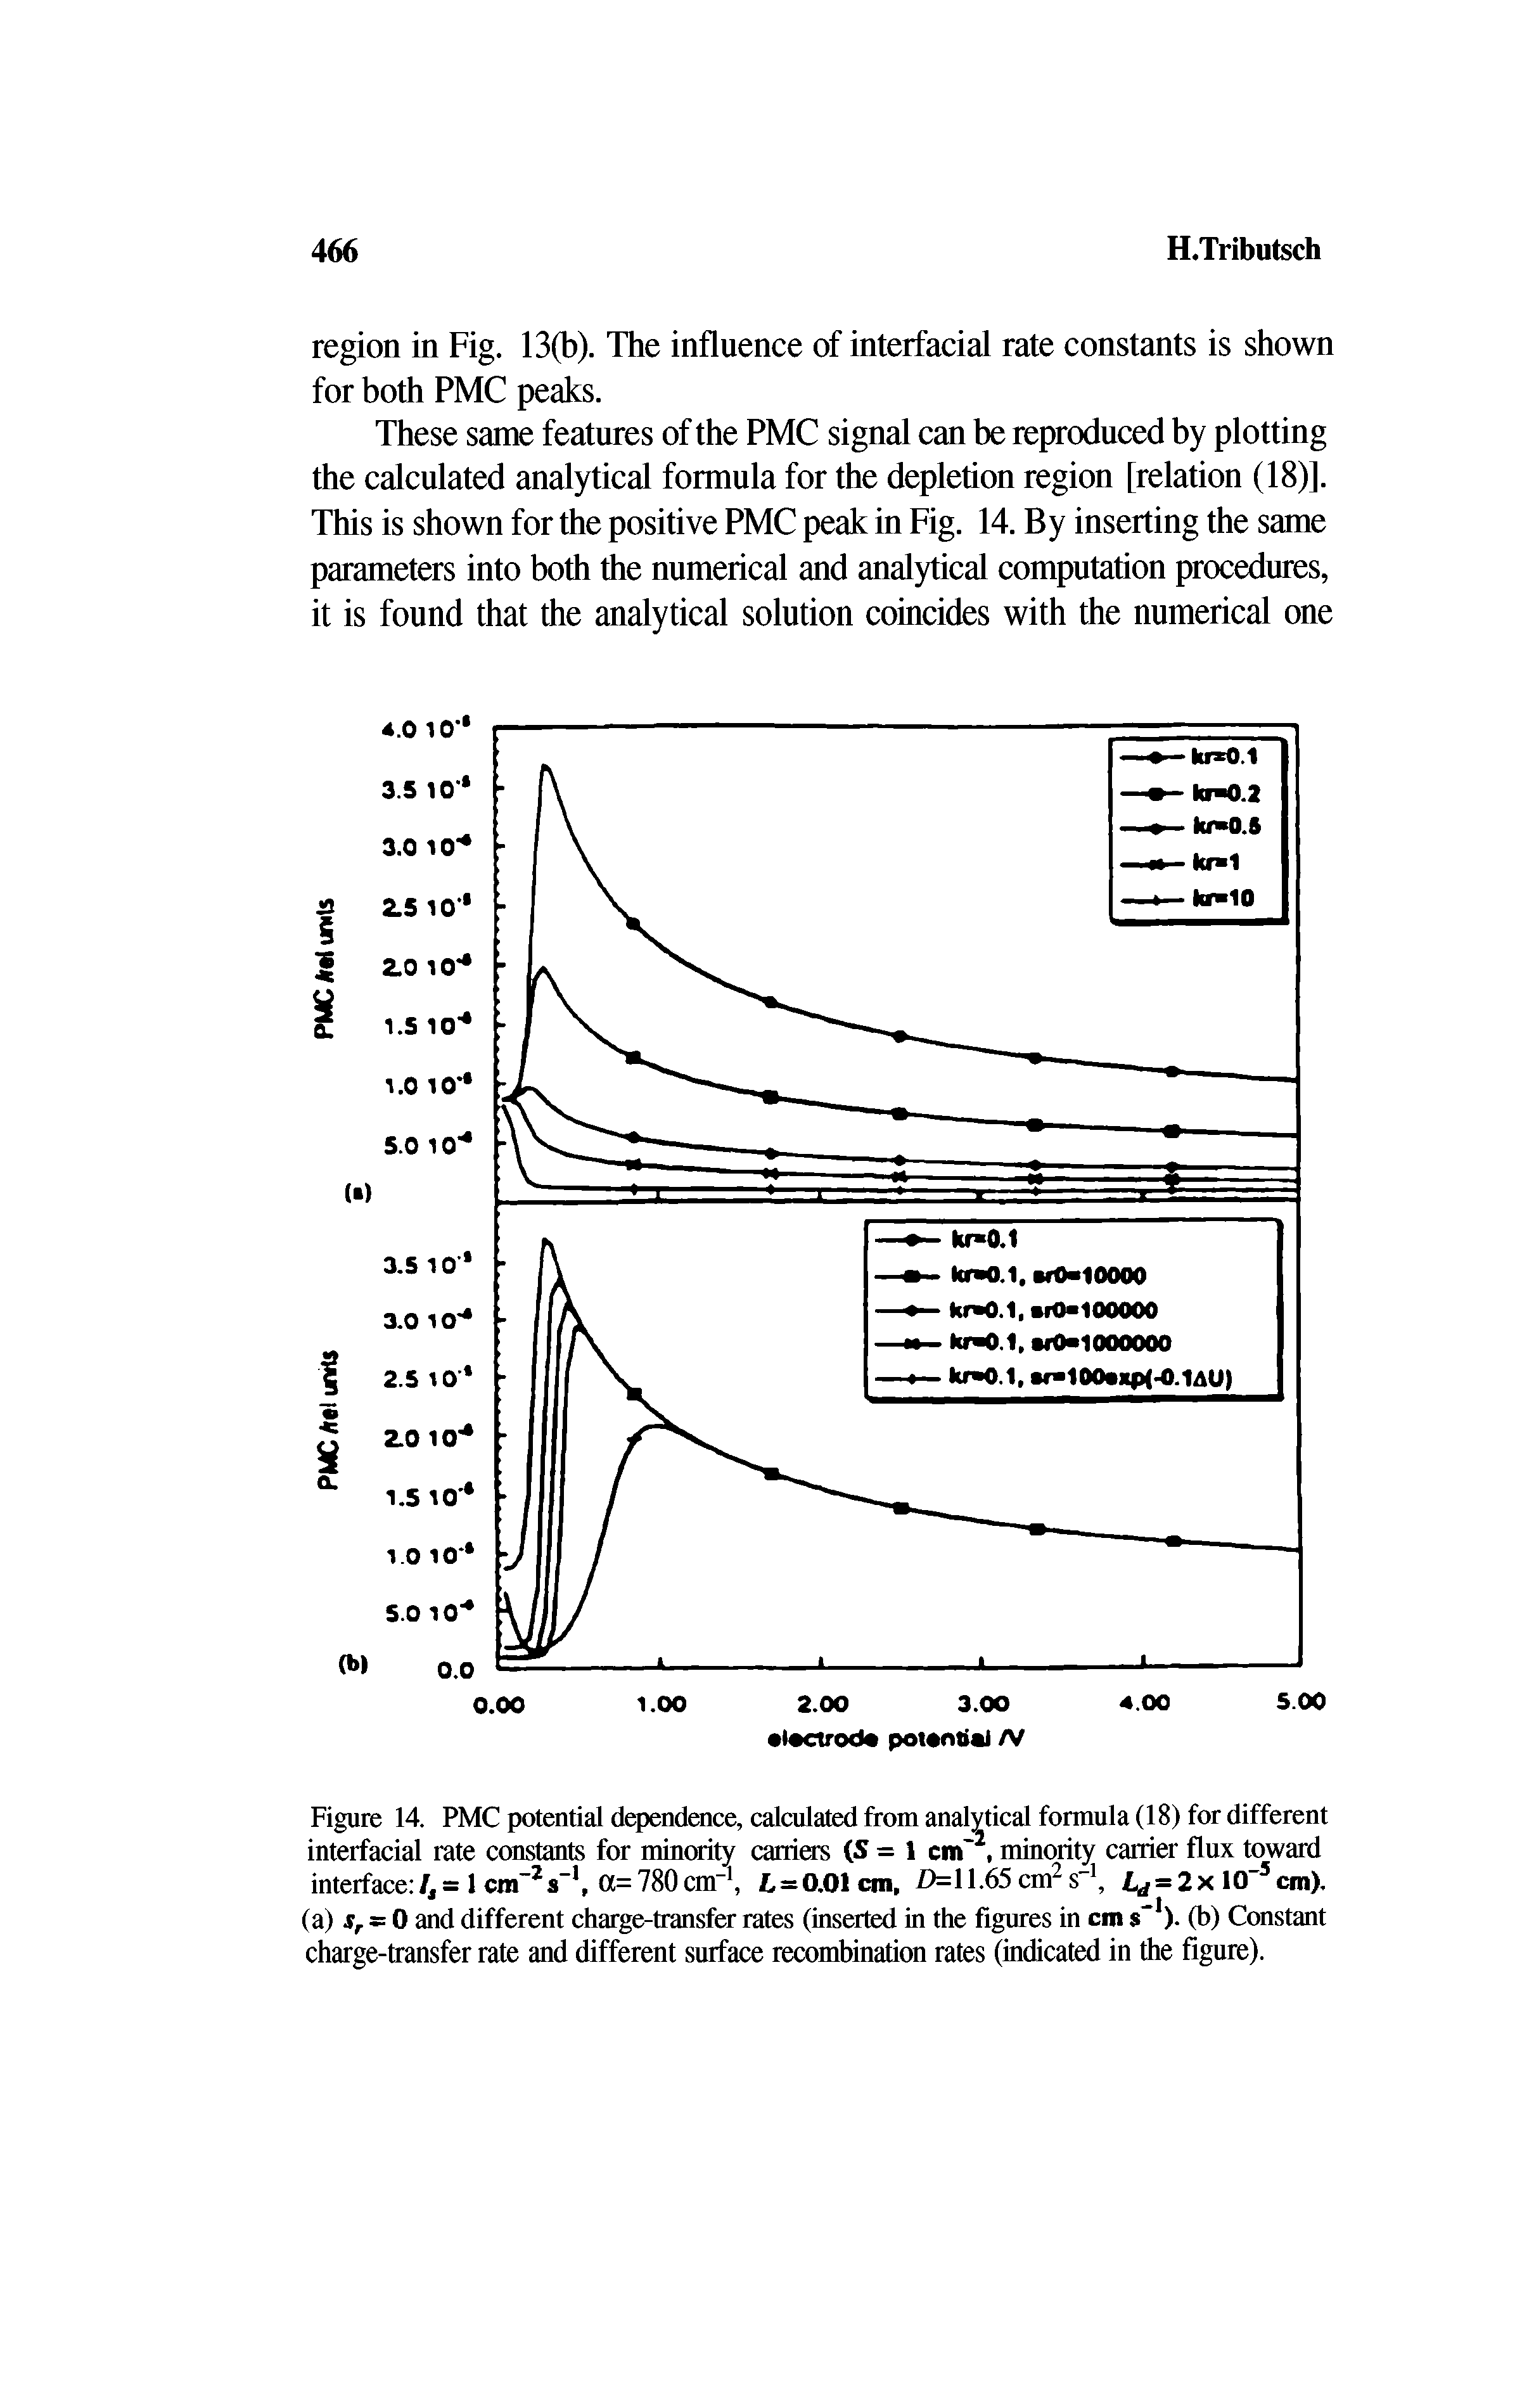 Figure 14. PMC potential dependence, calculated from analytical formula (18) for different interfacial rate constants for minority carriers S = 1 cm, minority carrier flux toward interface I,- 1 cm-2s 1, a= 780enr1, L = 0.01 cm, 0=11.65 cmV, Ld = 2x 0"3cm), (a) sr = 0 and different charge-transfer rates (inserted in the figures in cm s 1), (b) Constant charge-transfer rate and different surface recombination rates (indicated in the figure).